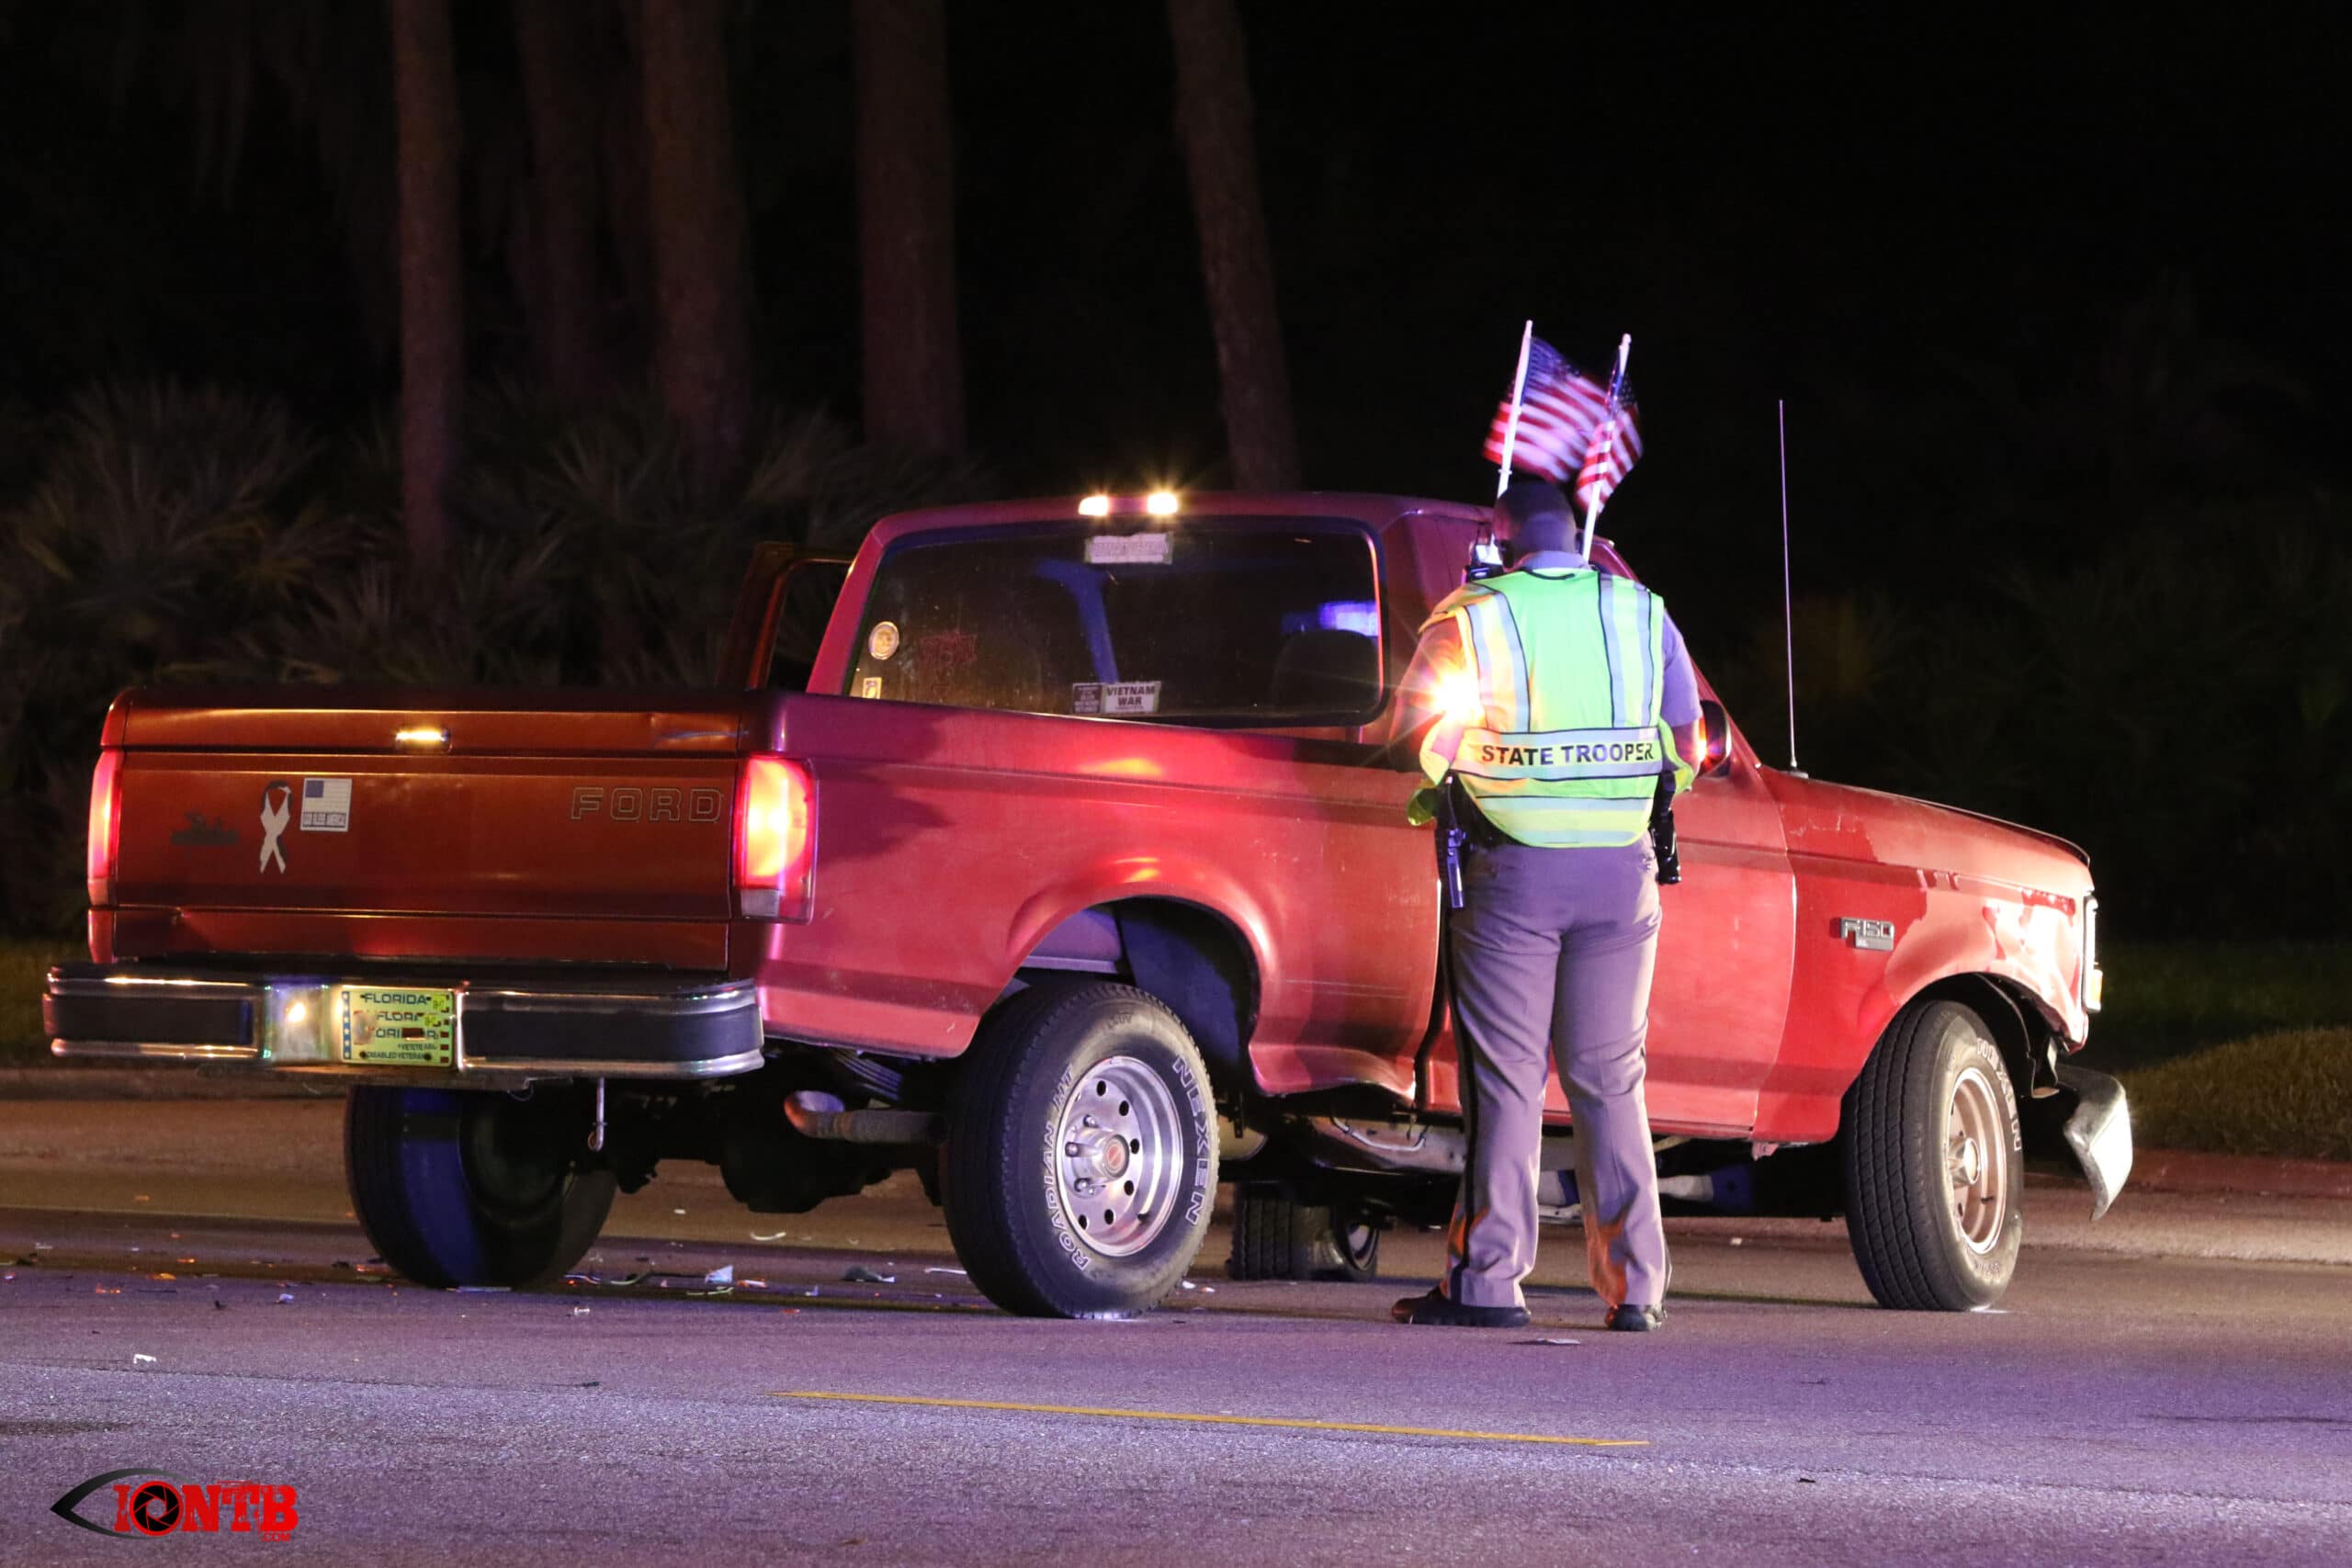 FHP Trooper examines the pickup truck involved in the crash